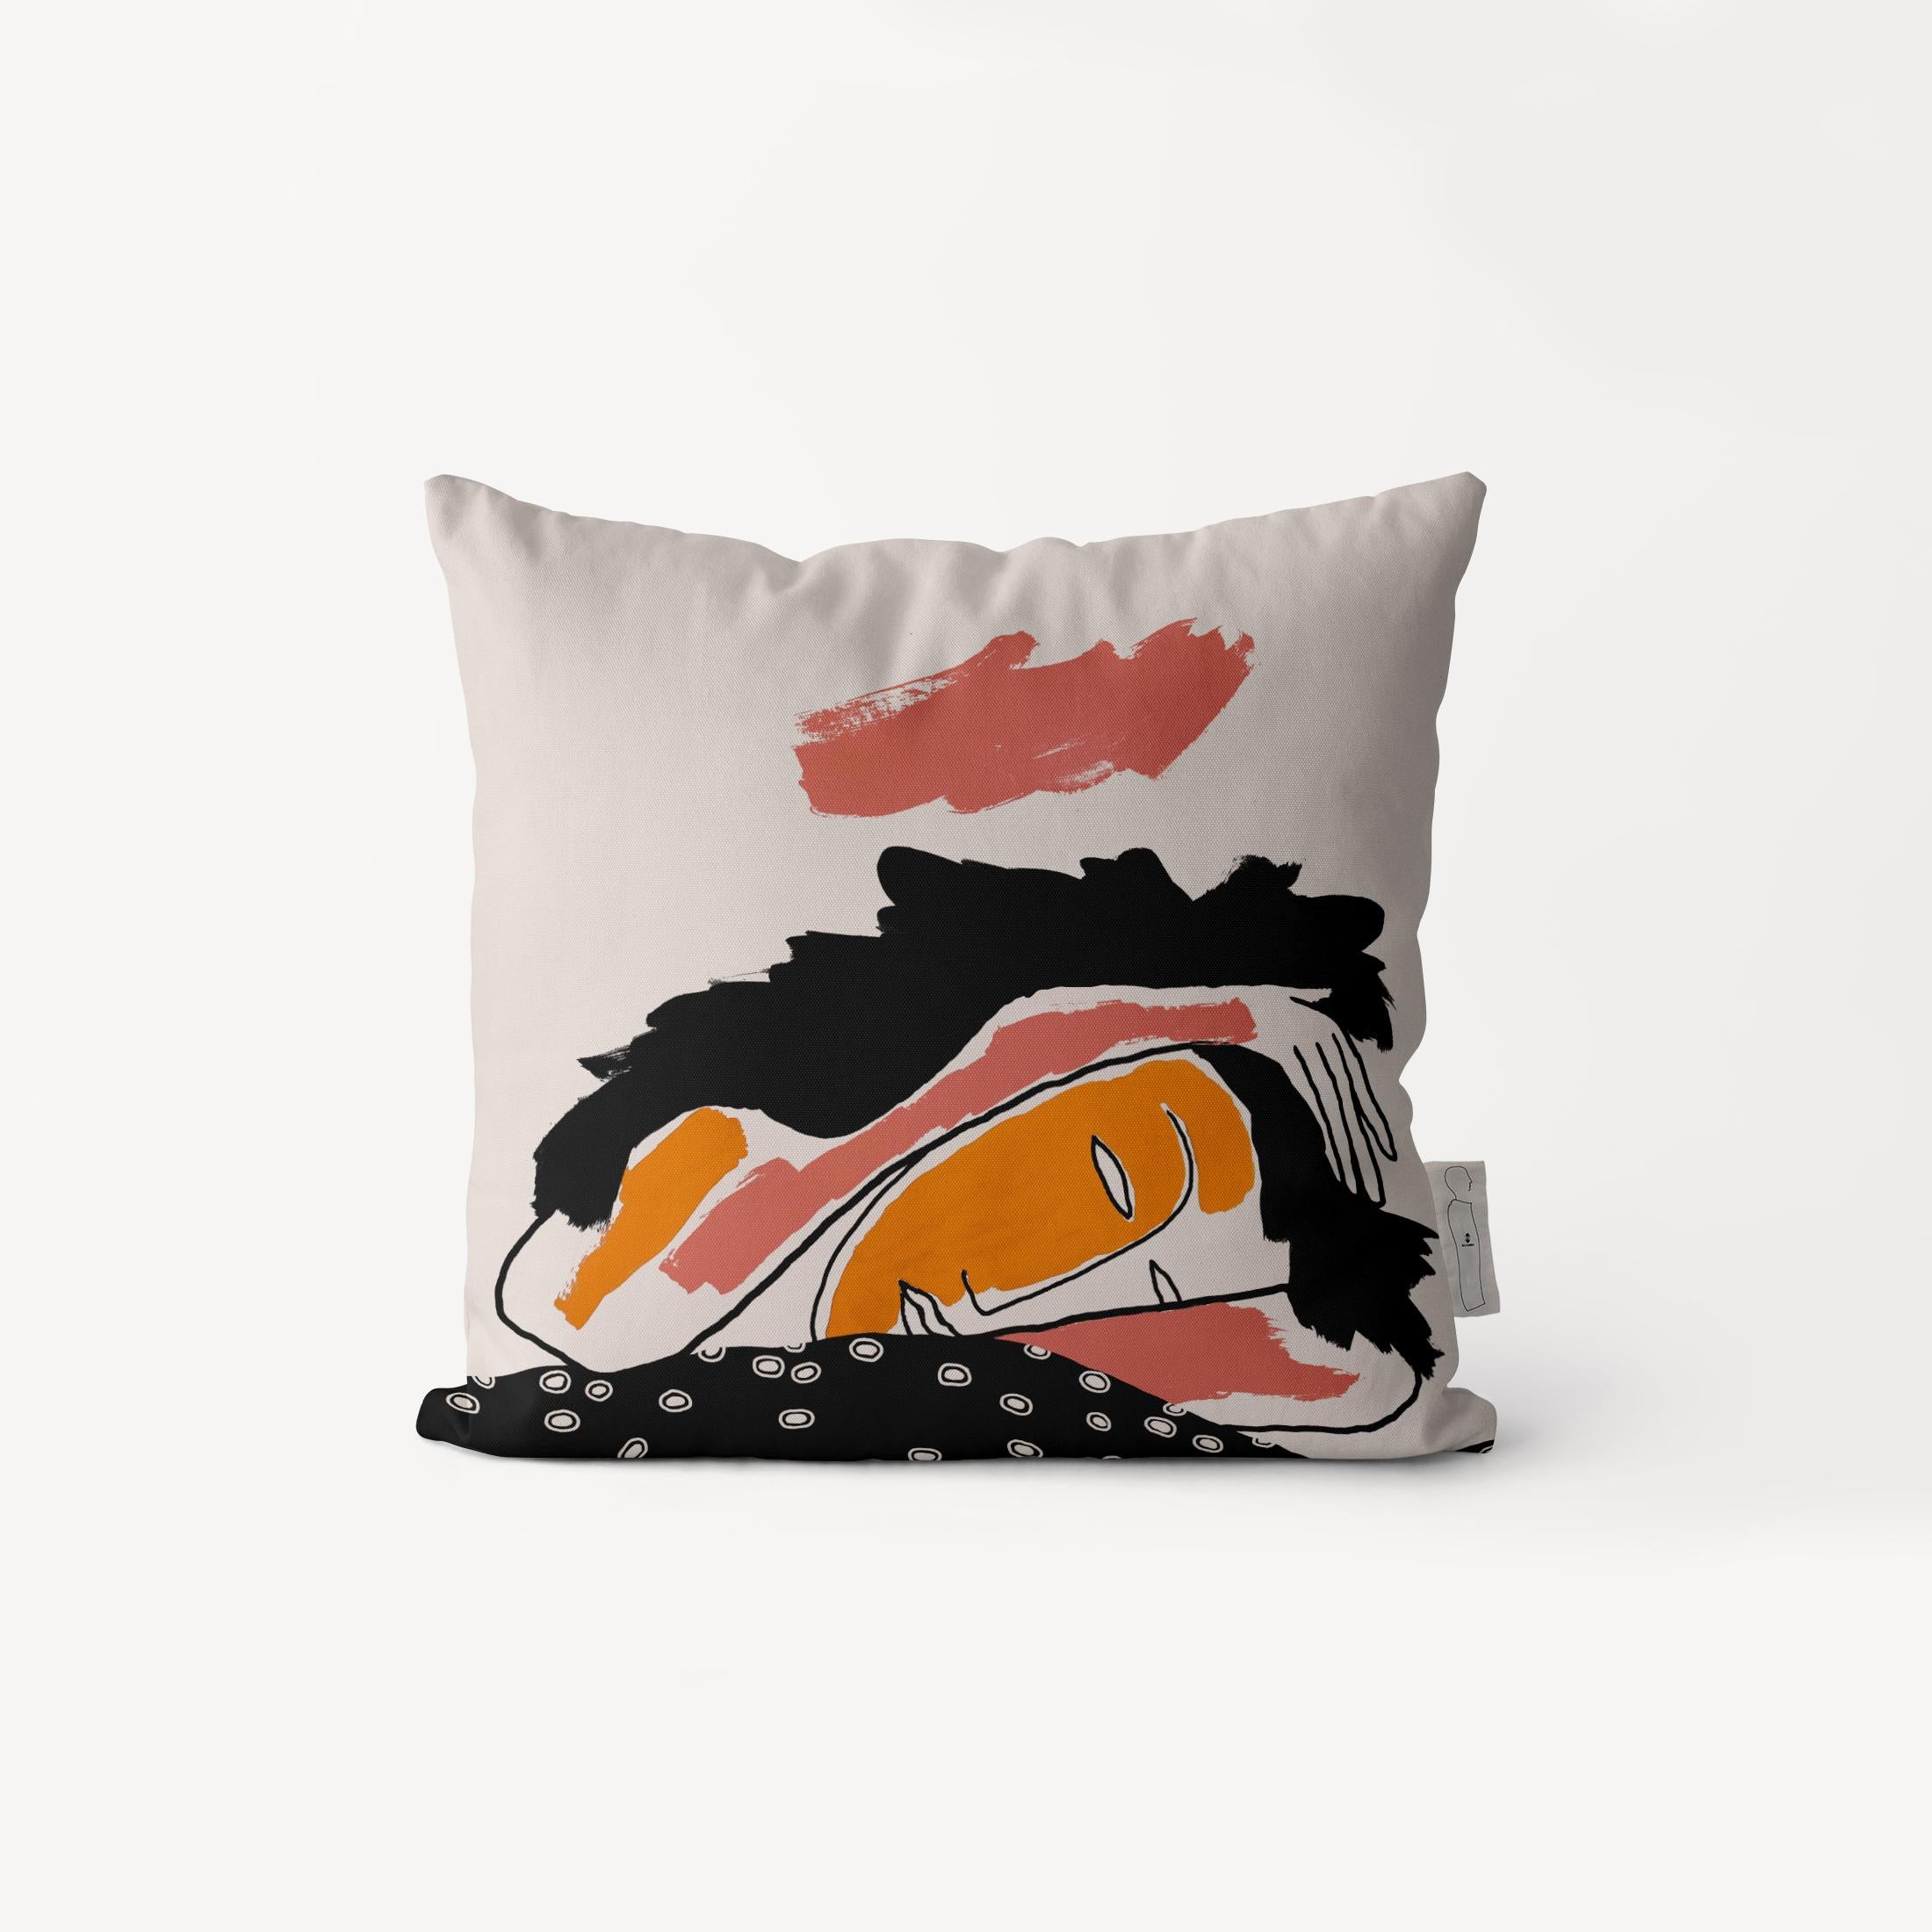 The pillow series titled 